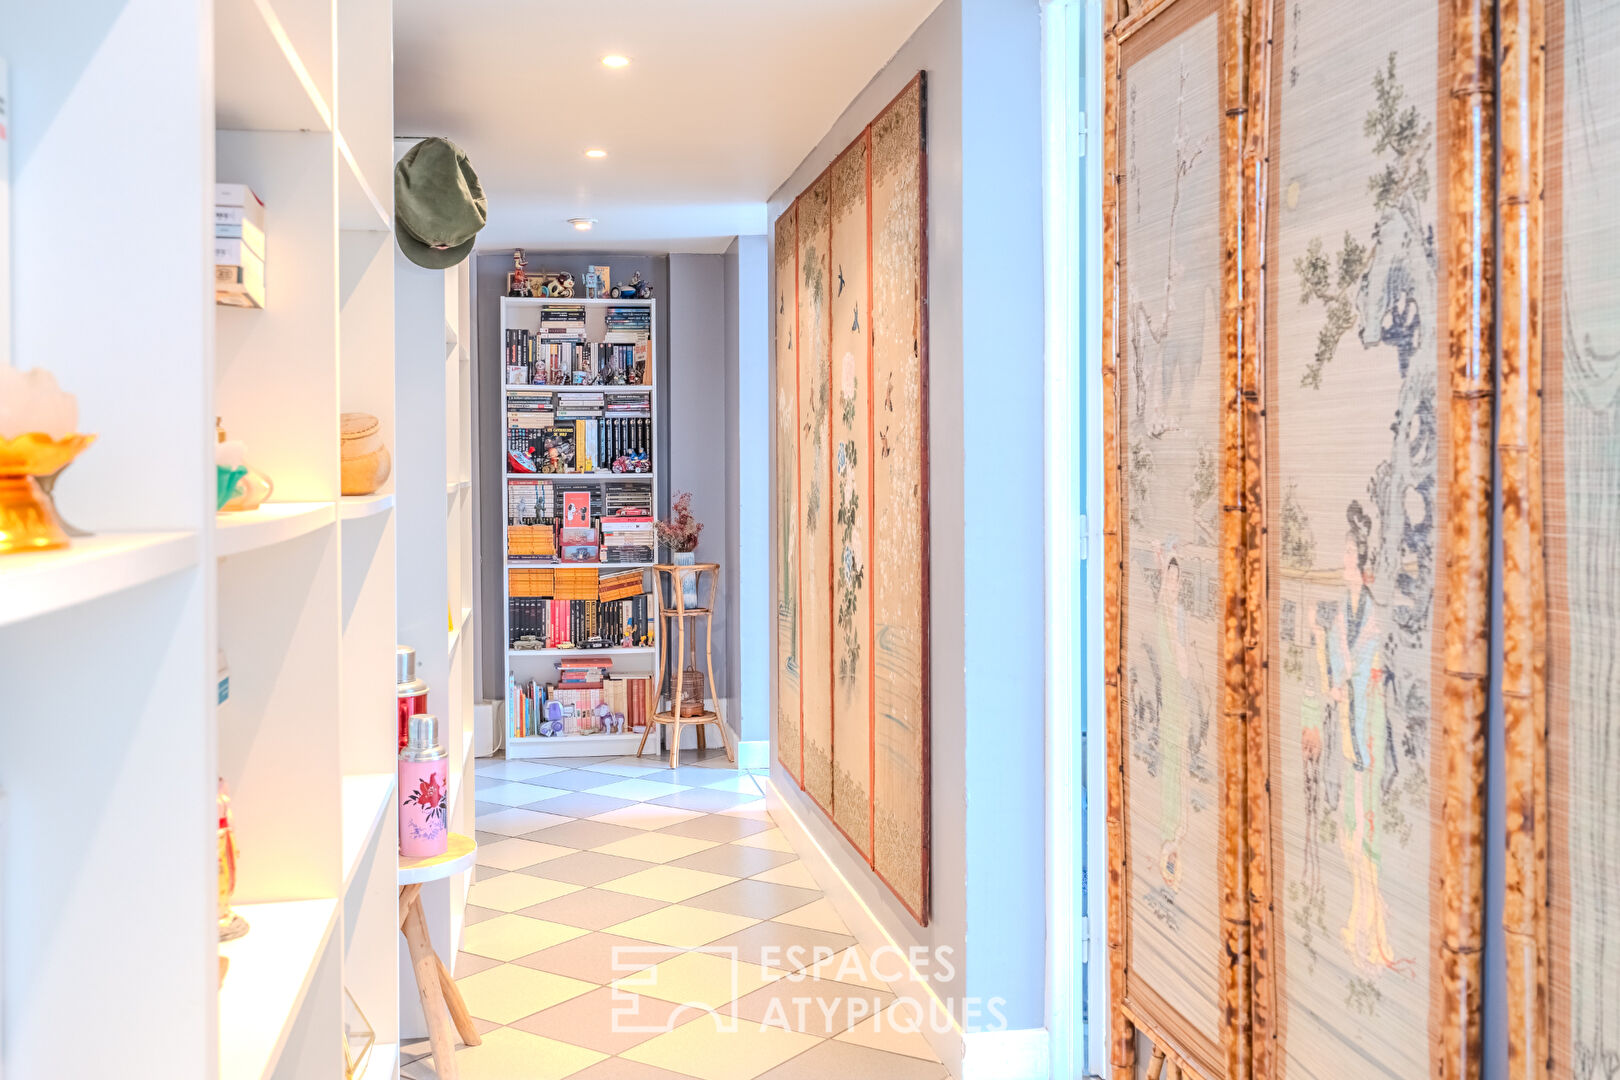 Loft of more than 360 sqm in sought-after area of Carrières sur Seine